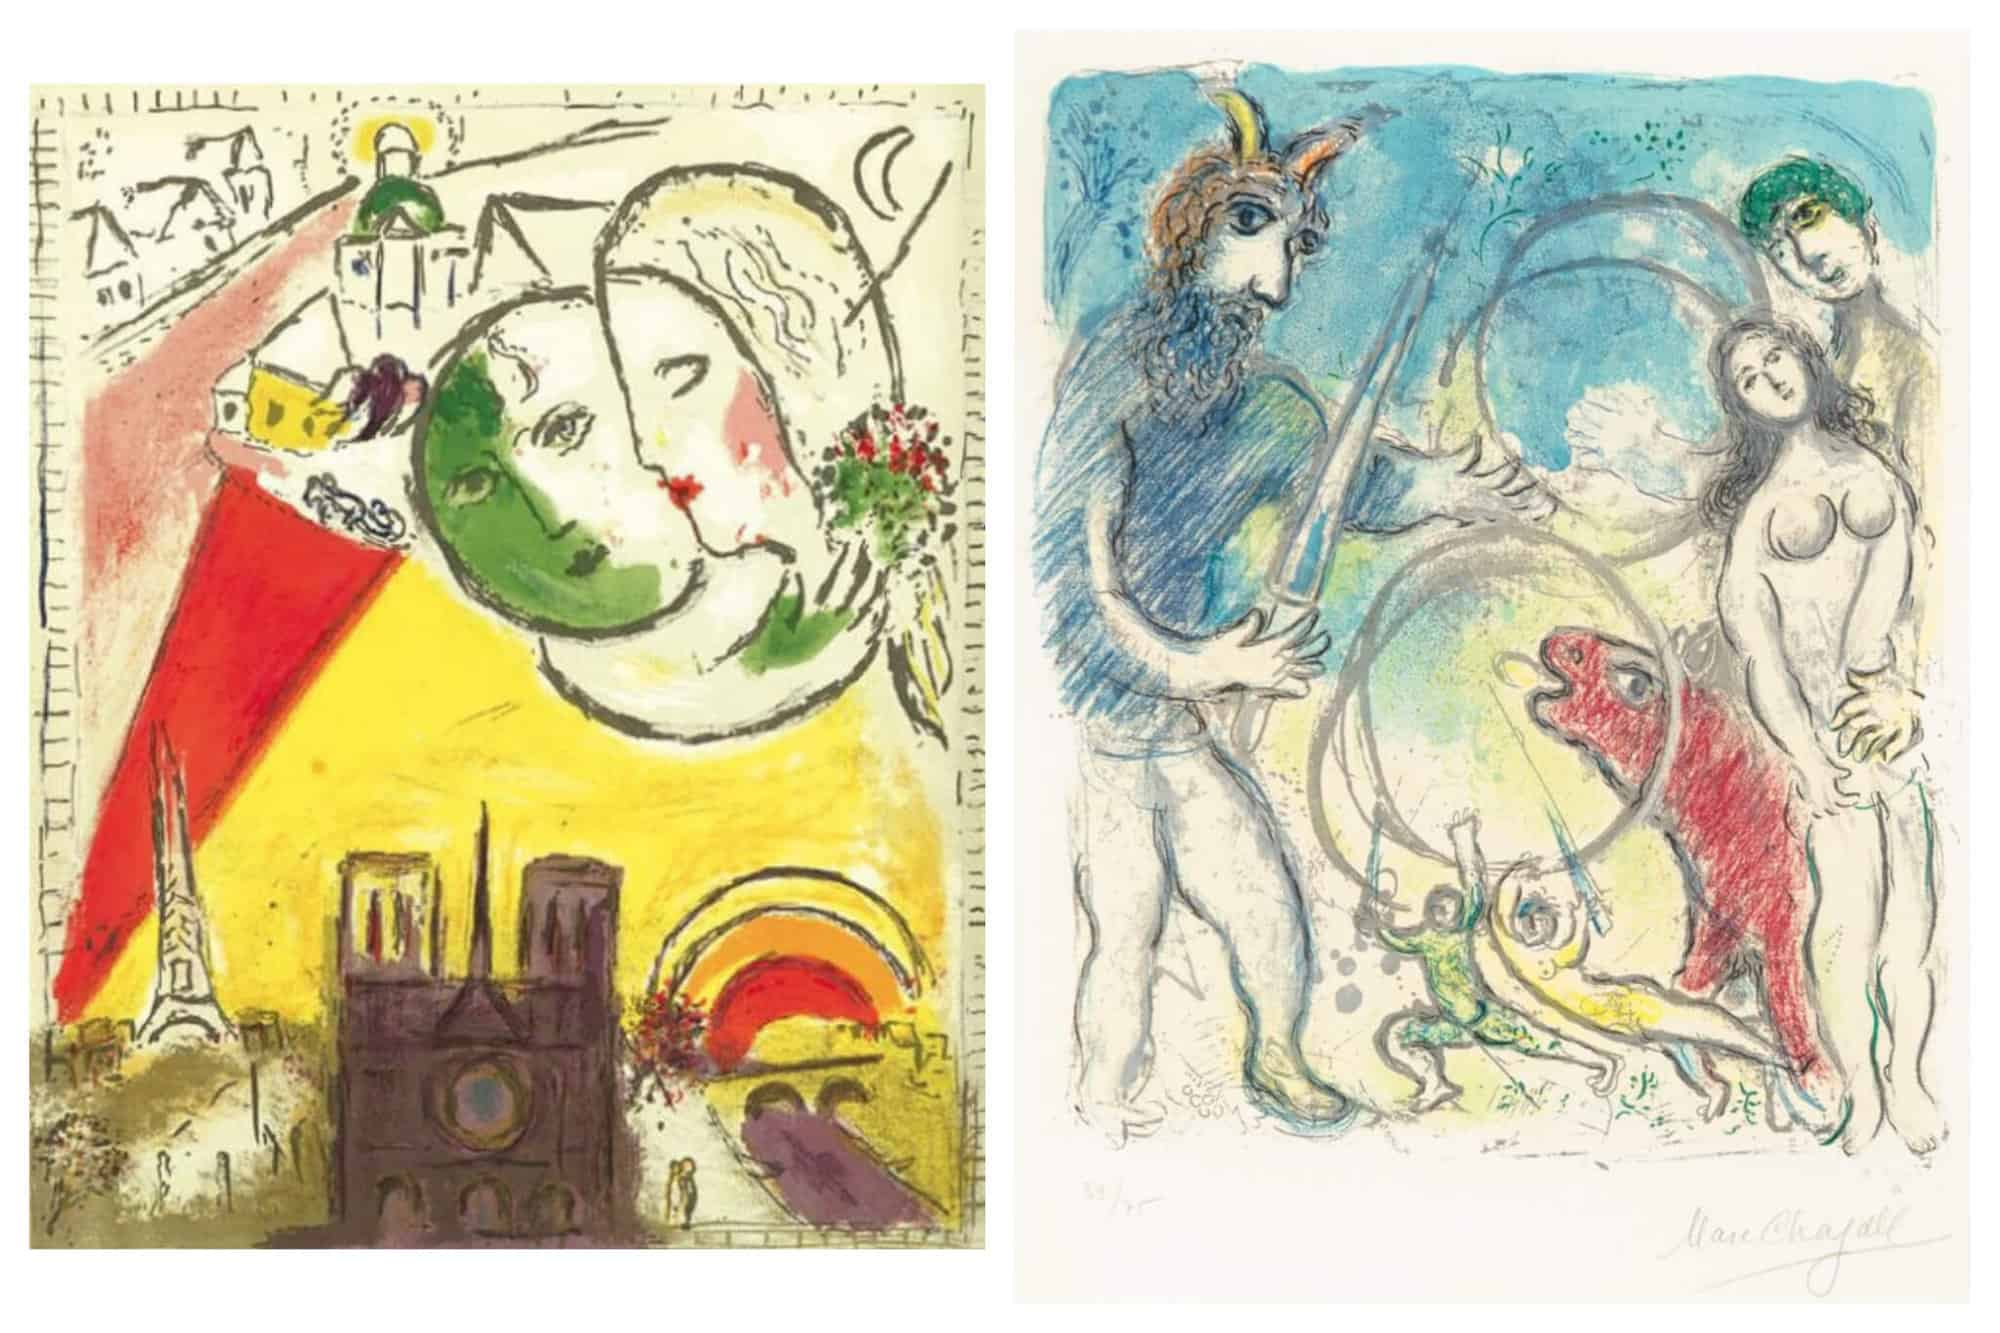 Two colour lithographs by Marc Chagall. On the left is Dimanche, and on the right is A La Femme.